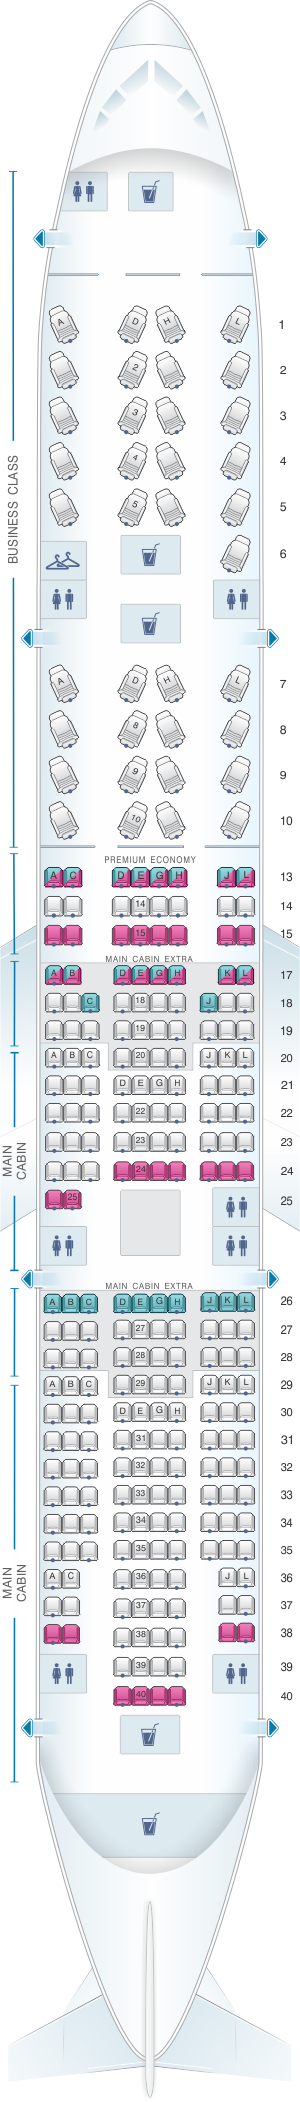 Seat Map American Airlines Boeing B777 200er 273pax Seatmaestro